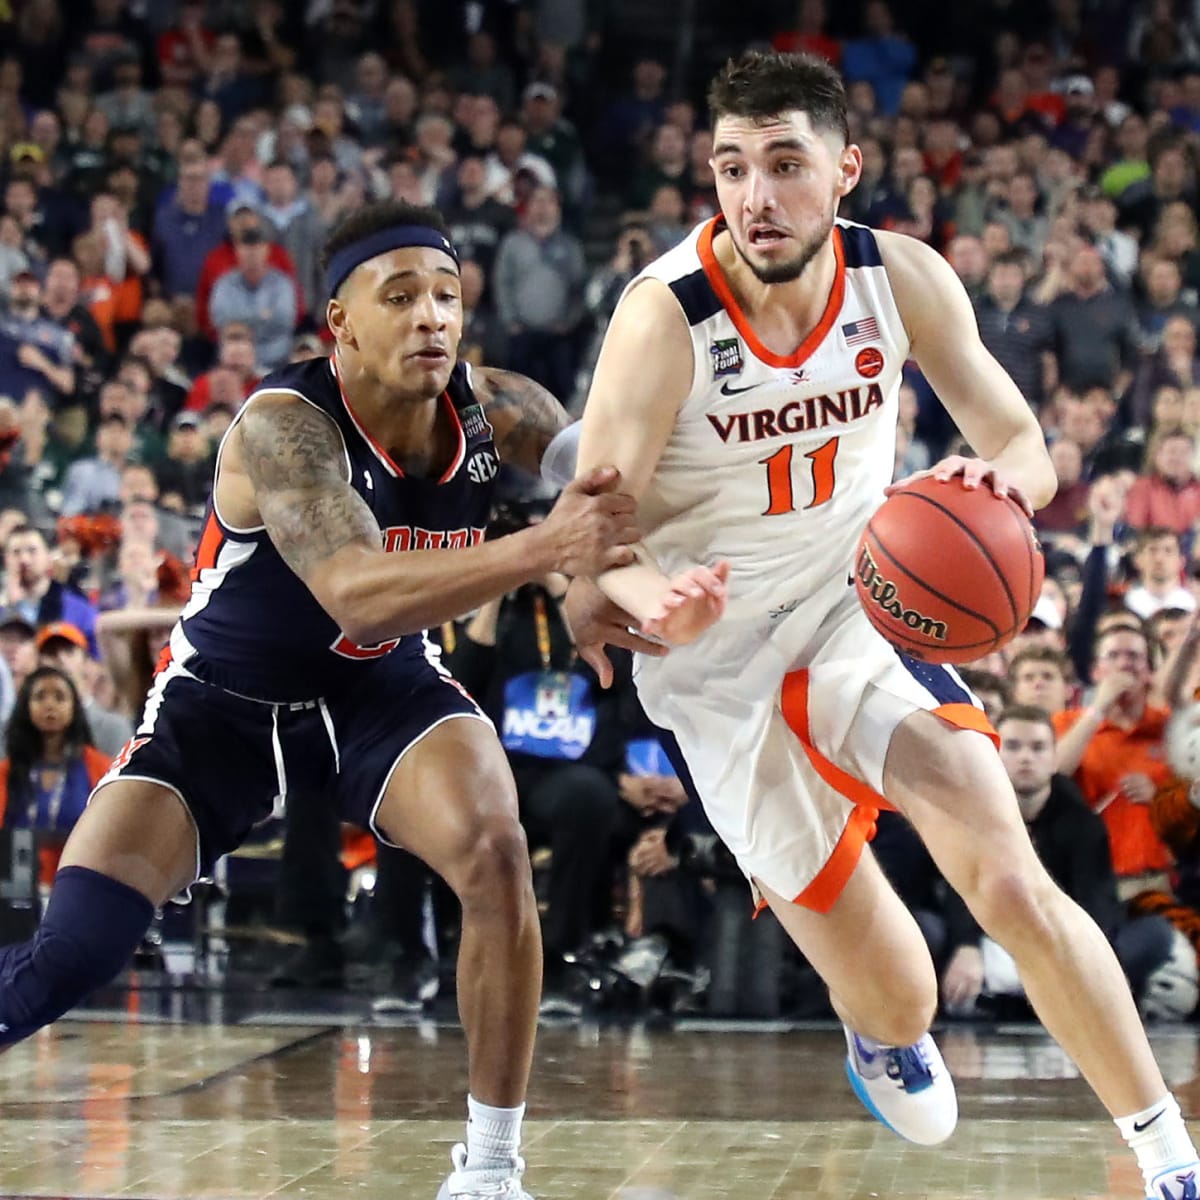 Virginia Cavaliers guard Ty Jerome thrives on doubter and beating